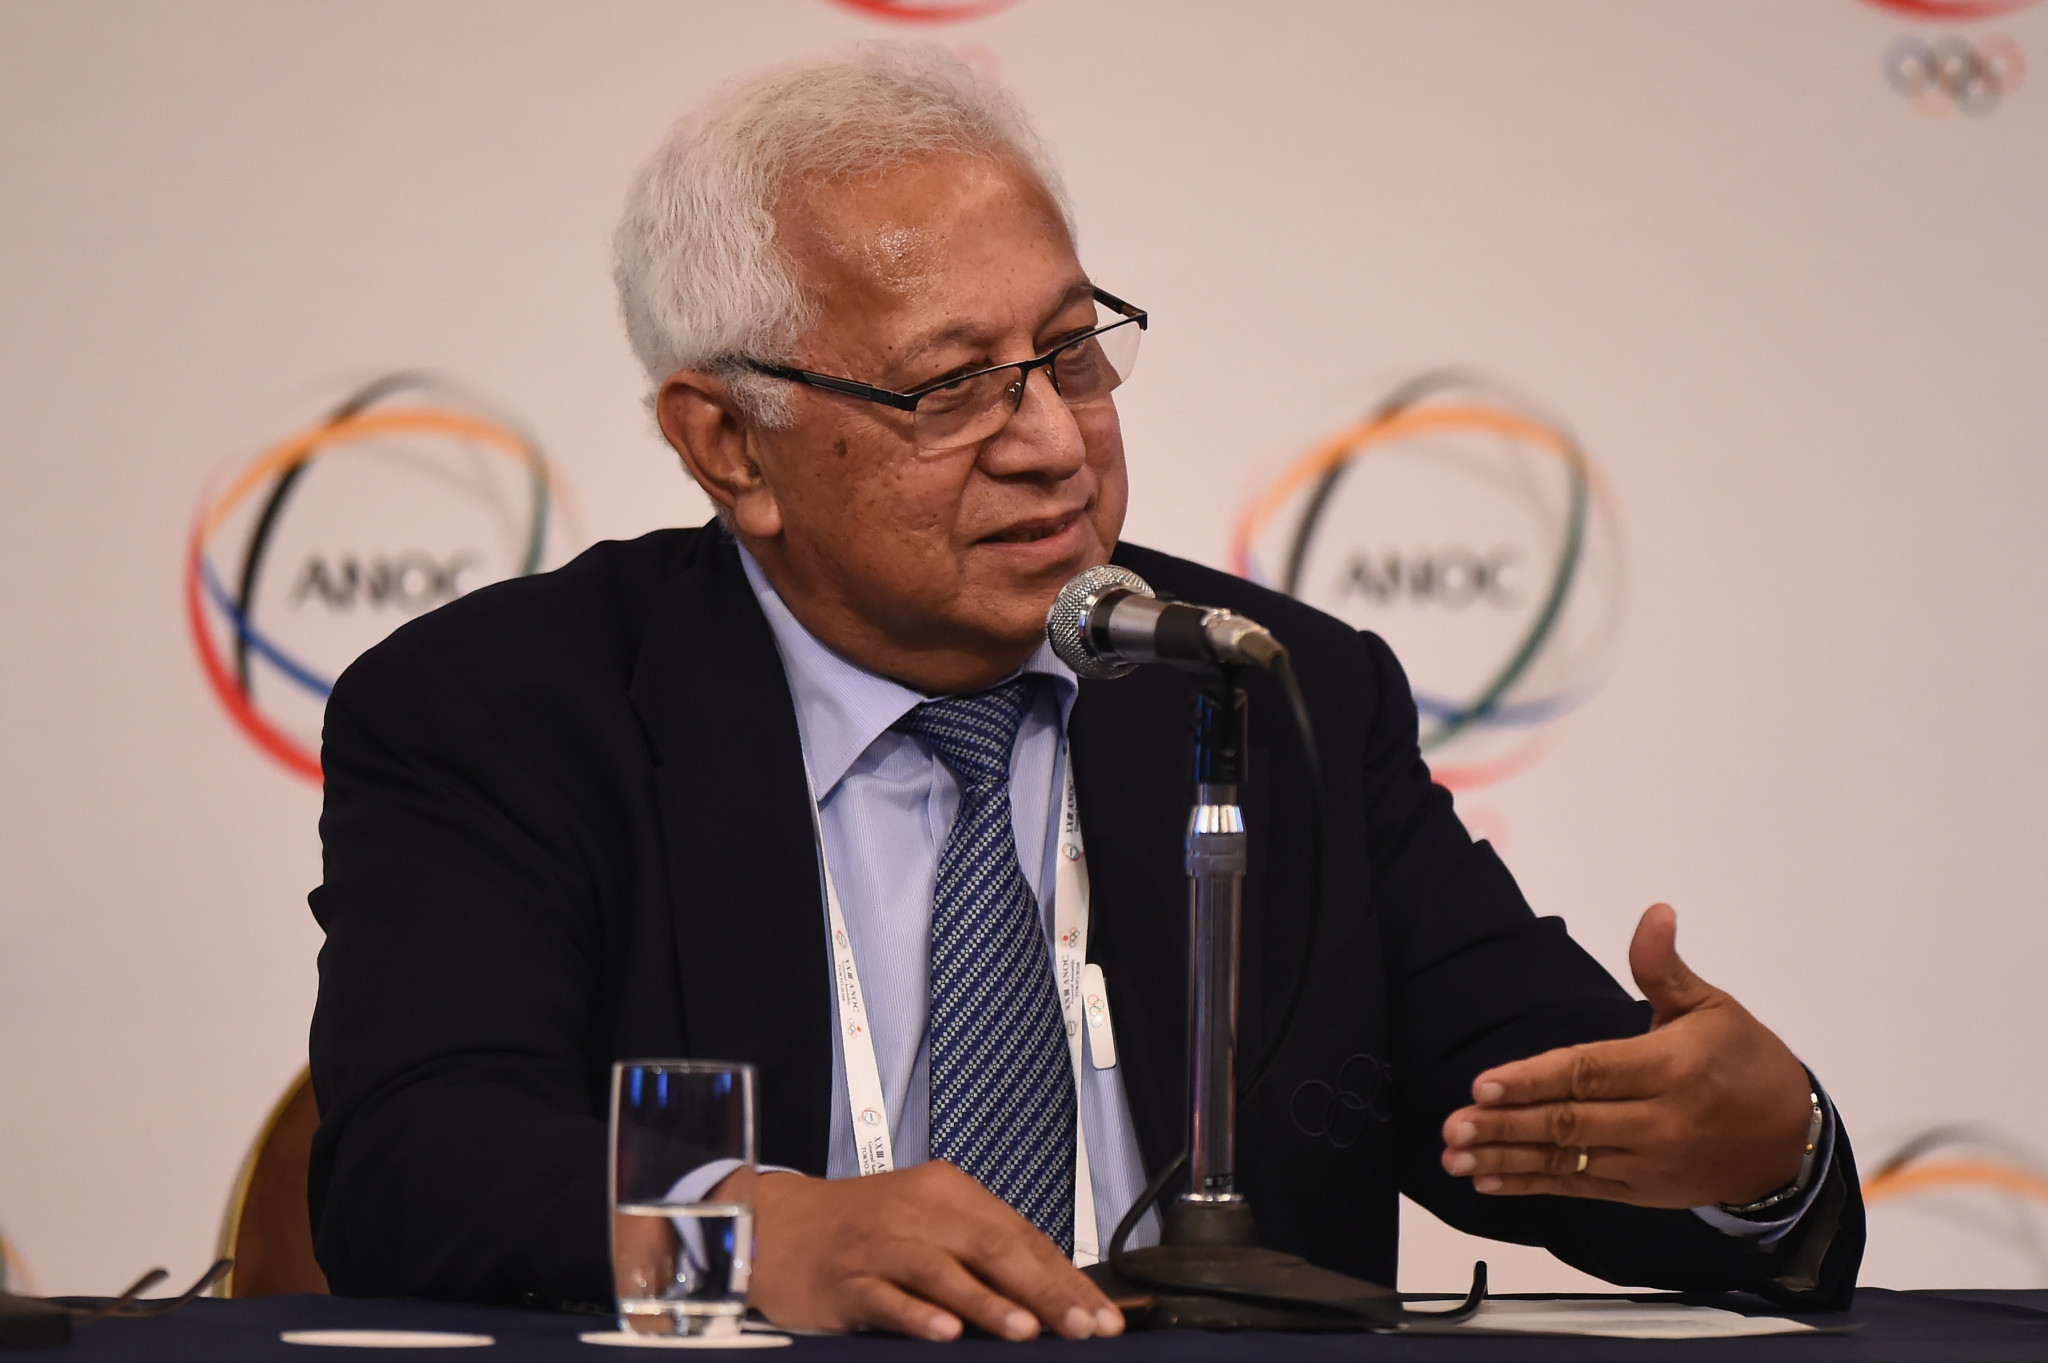 Acting ANOC President believes Tokyo 2020 will unite world's athletes